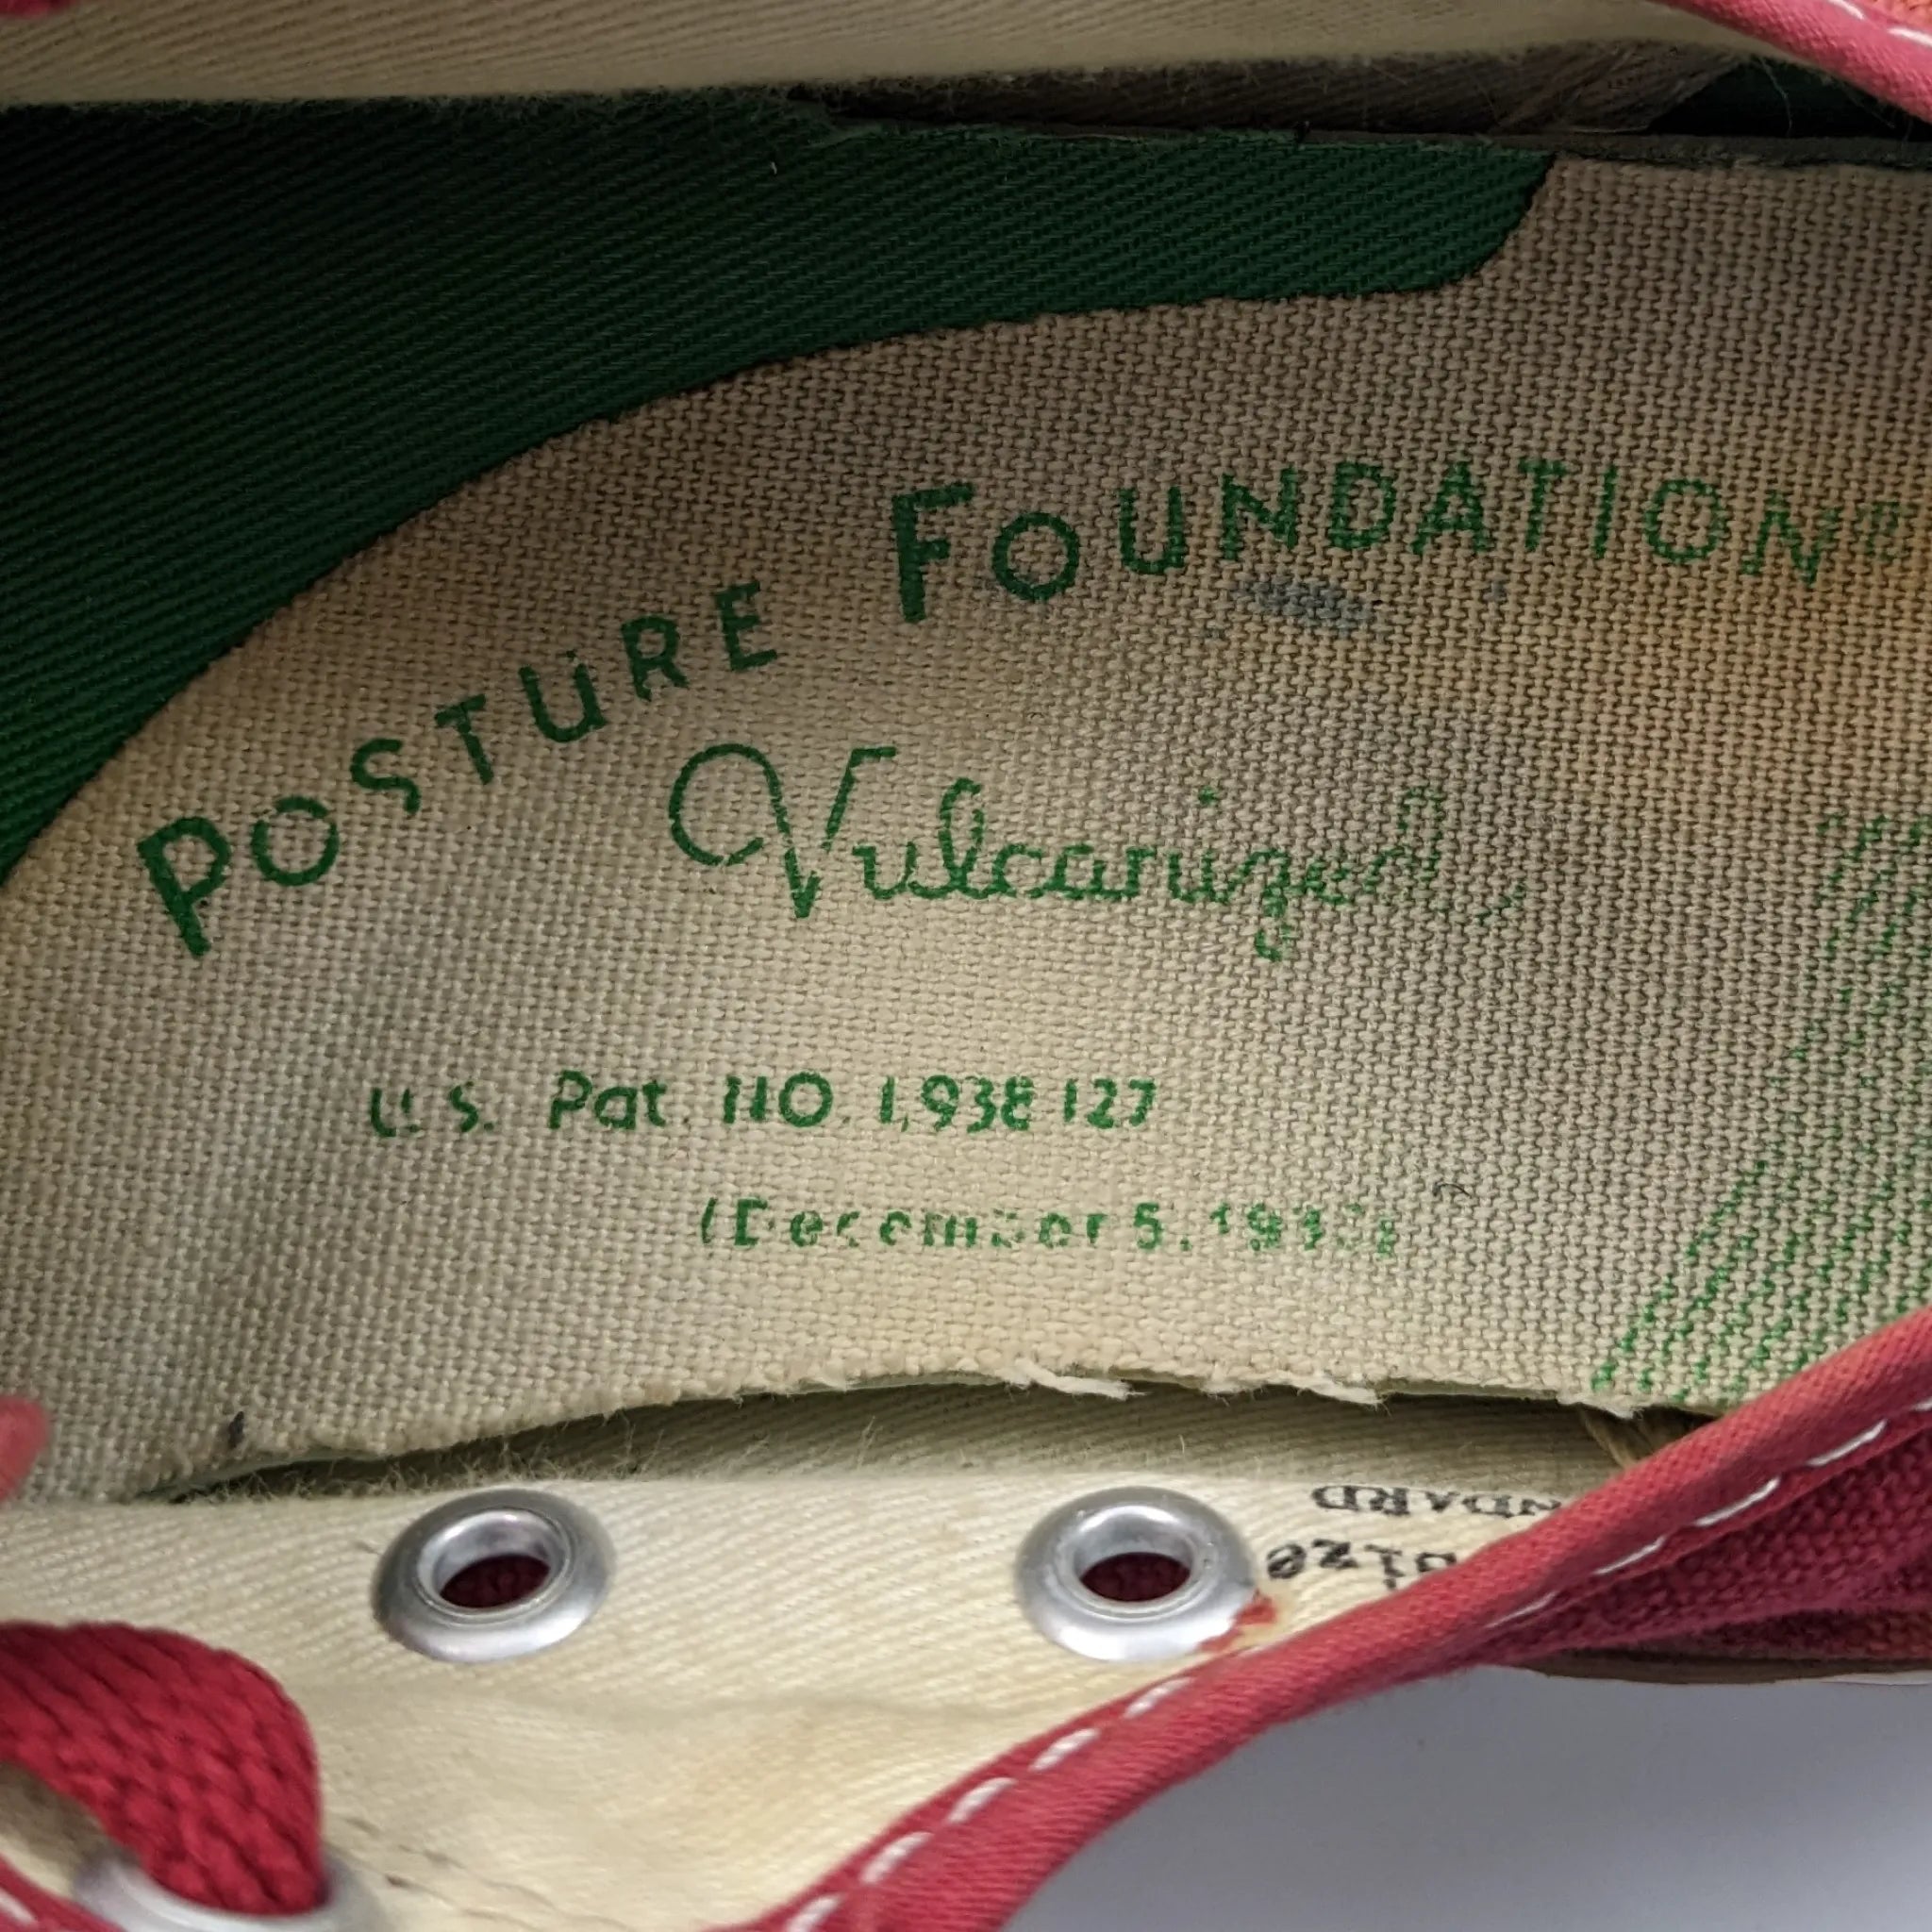 Posture Foundation Red Sneakers